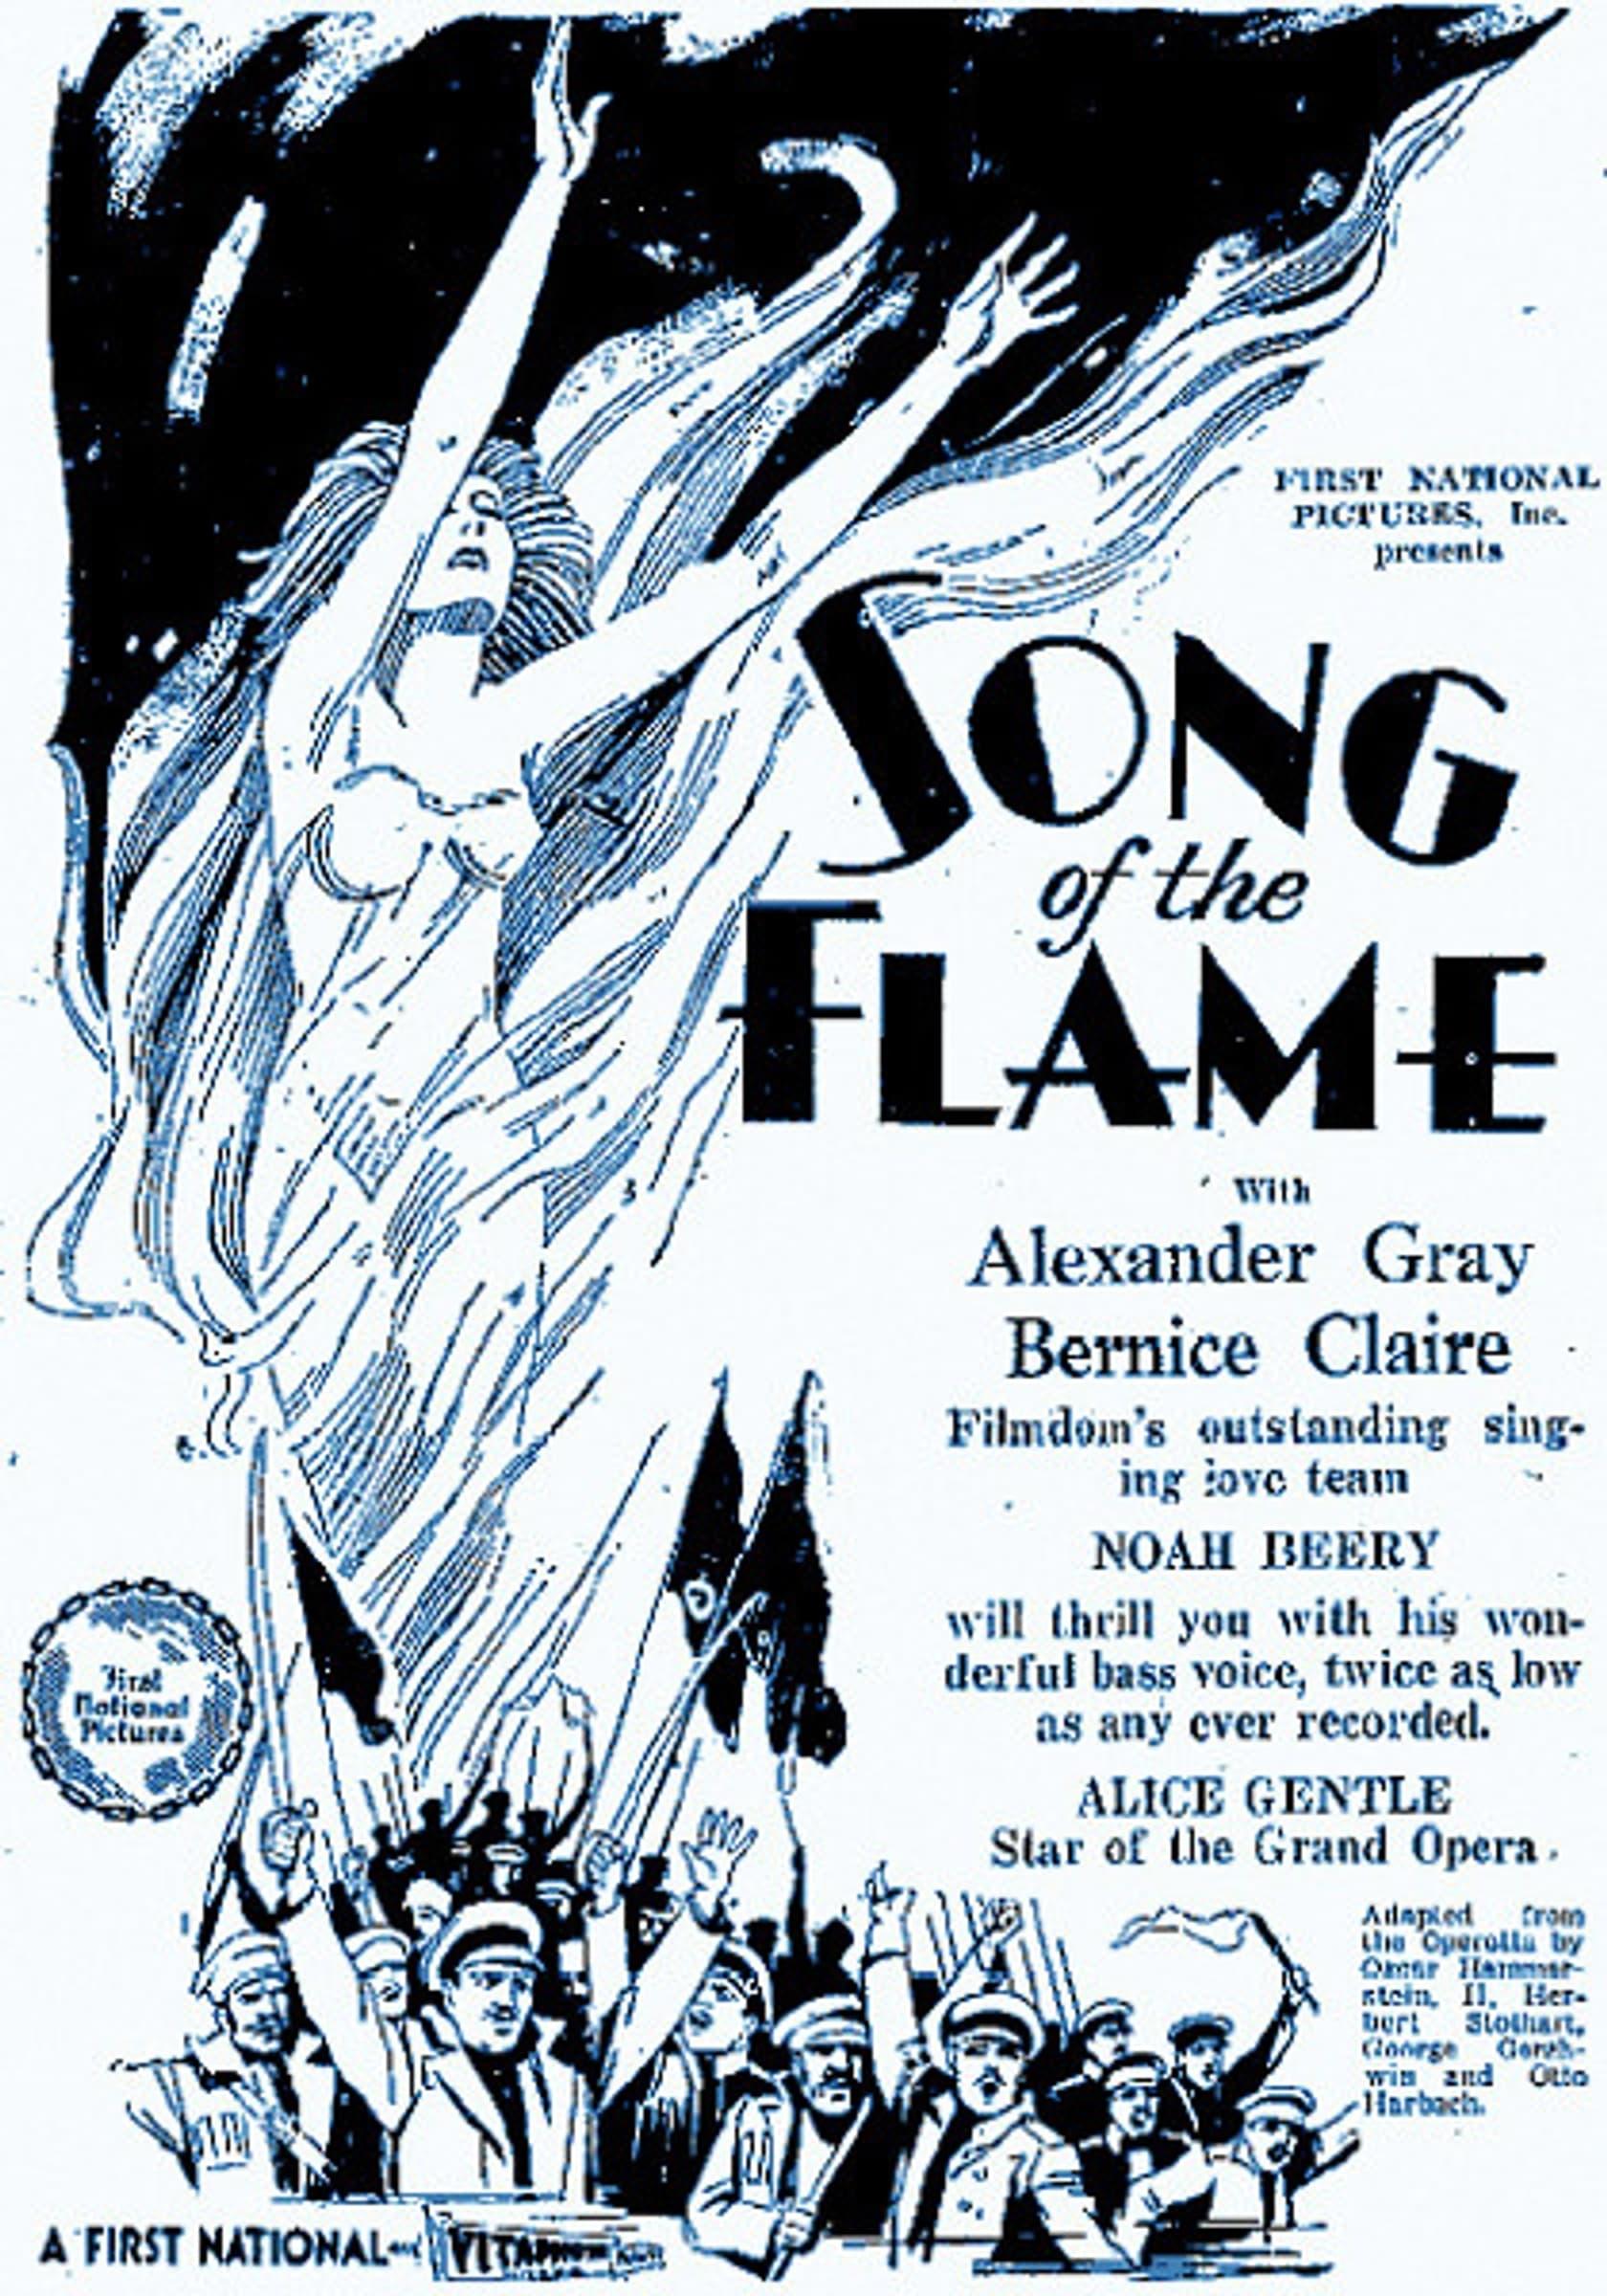 The Song of the Flame poster